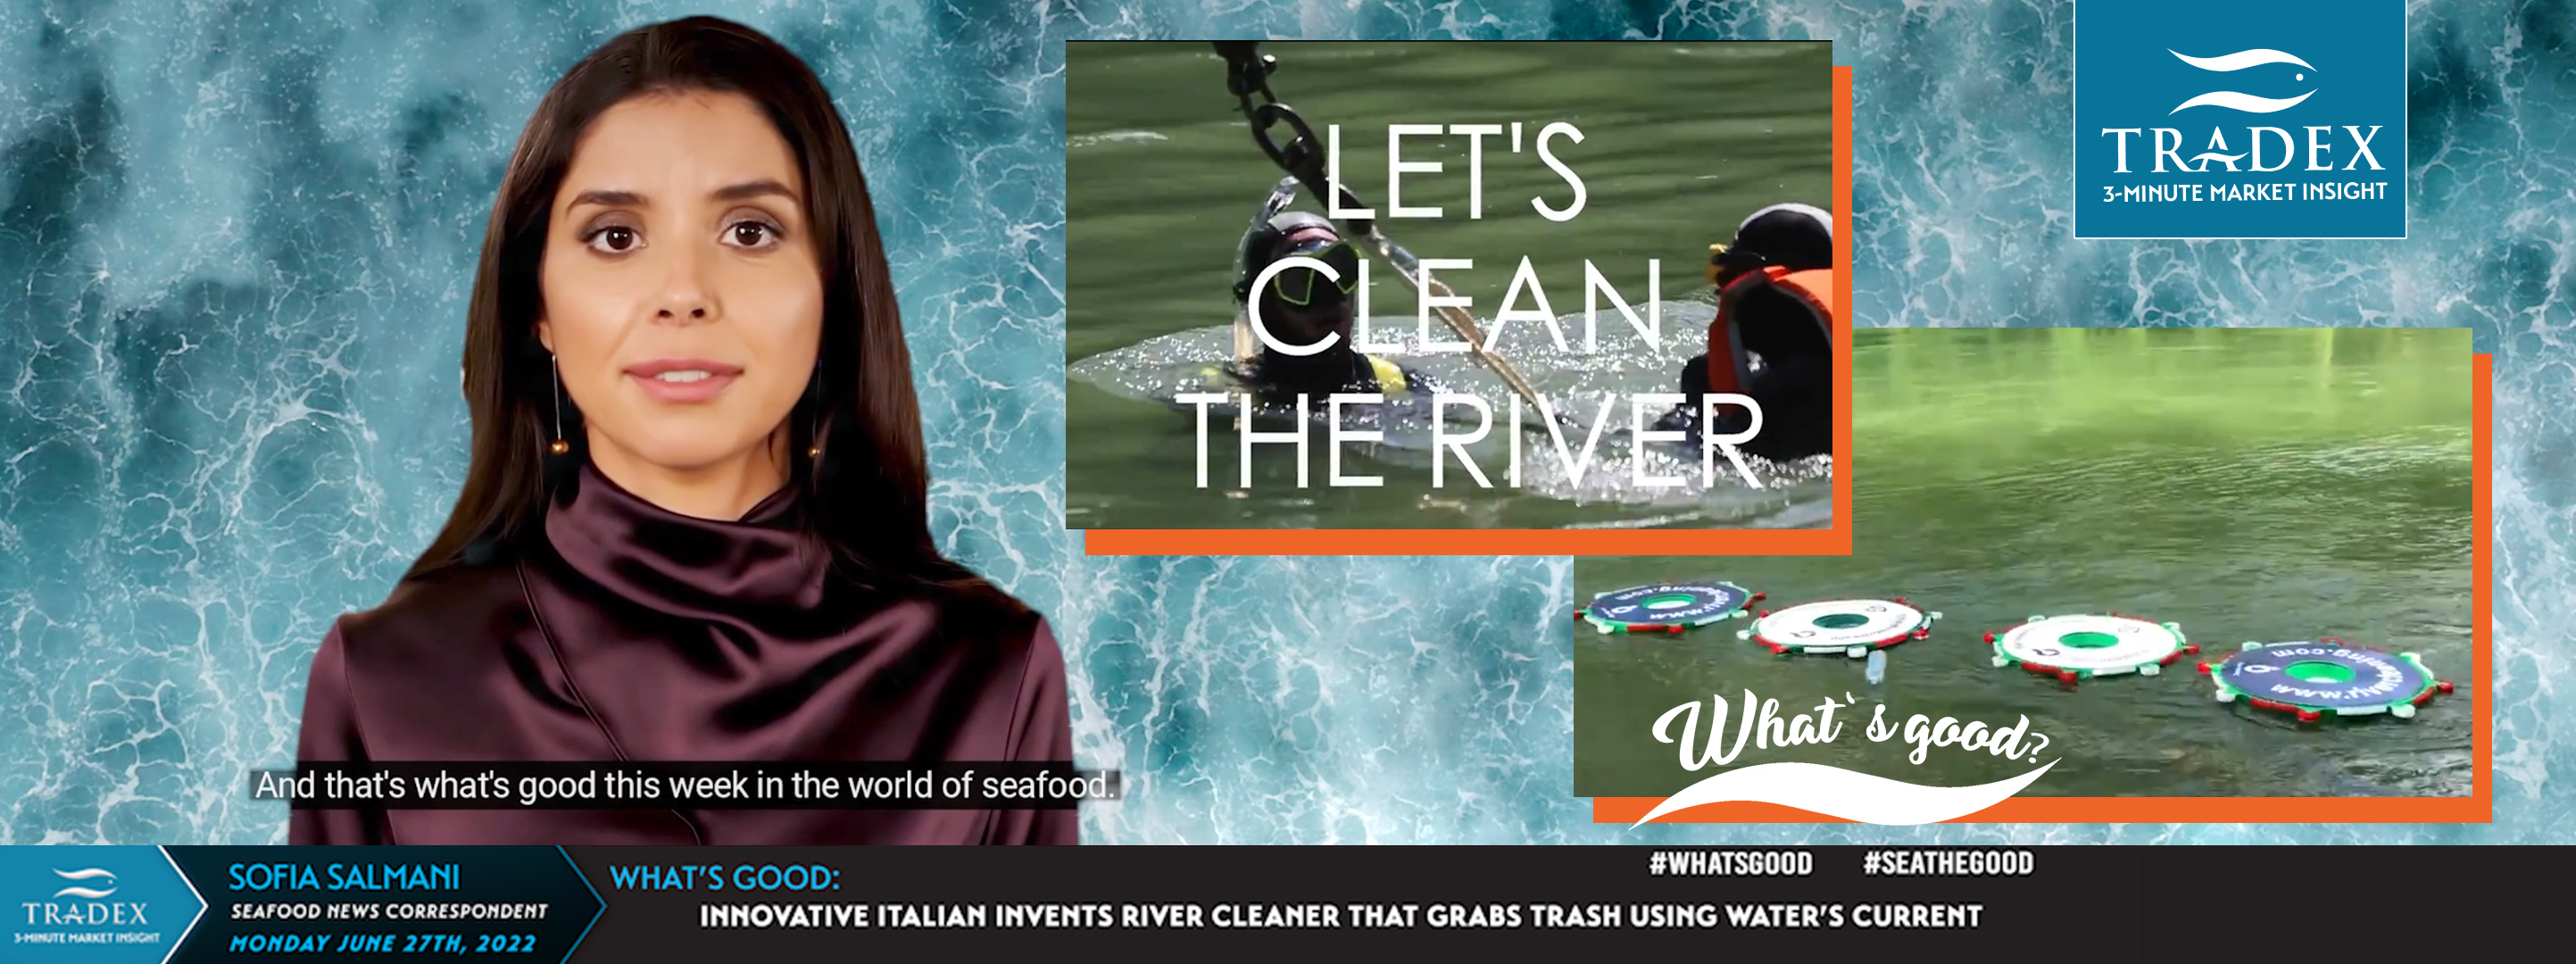 WHAT'S GOOD - INNOVATIVE ITALIAN INVENTS RIVER CLEANER